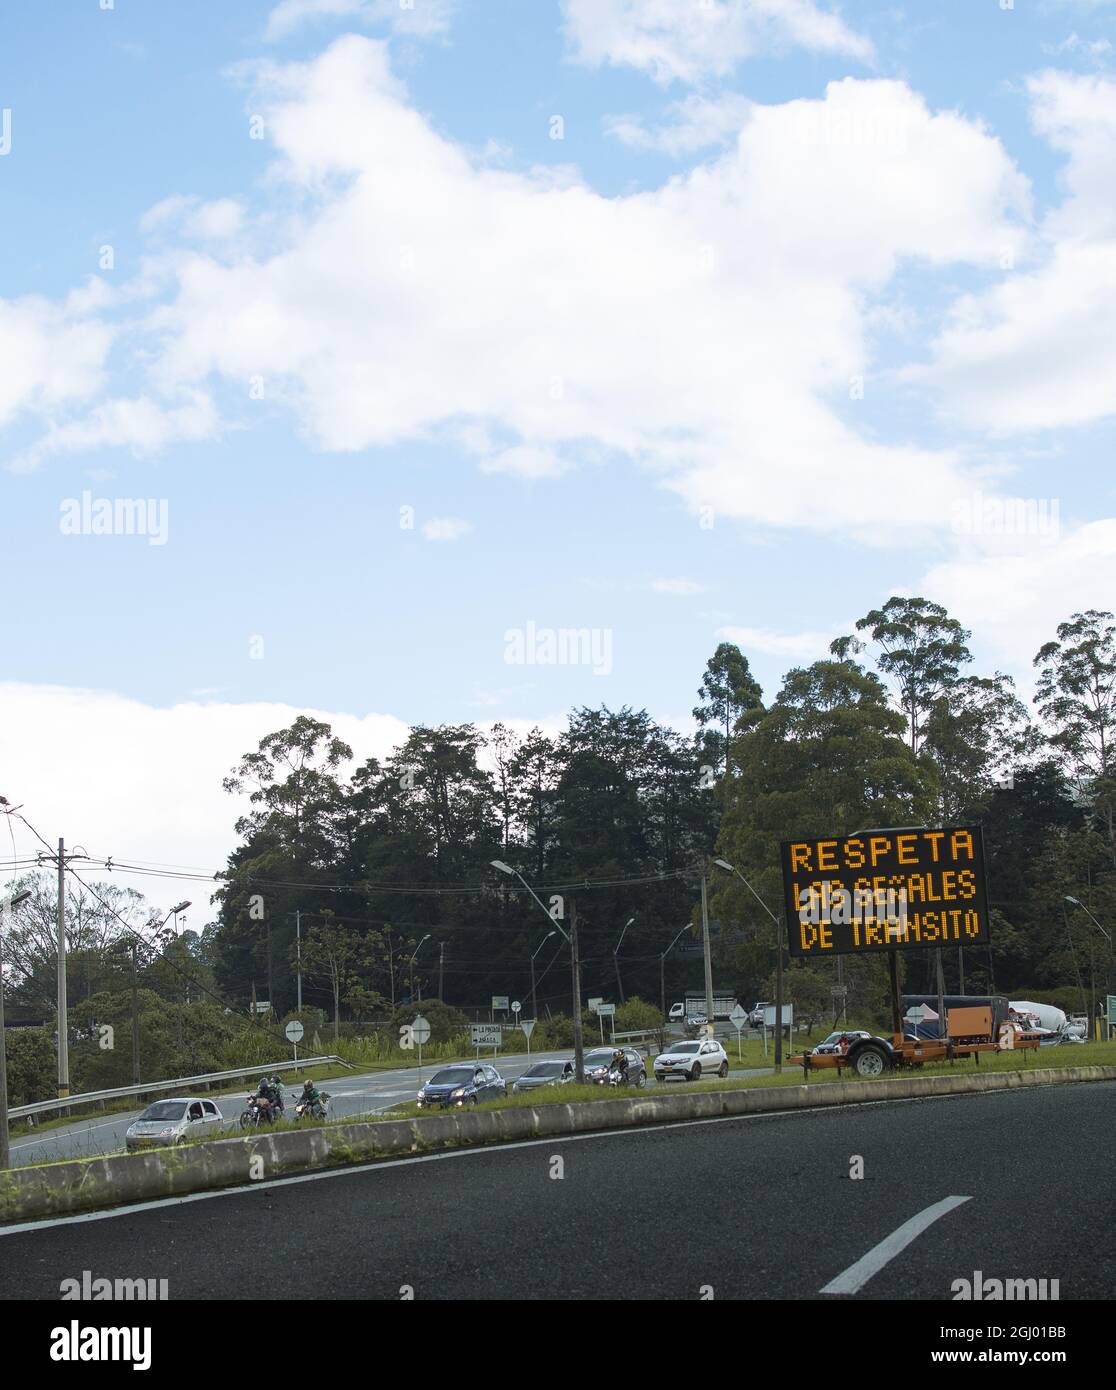 CALDAS, COLOMBIA - Aug 08, 2021: An English translation of 'Respect transit signals' along the road in Caldas, Colombia Stock Photo